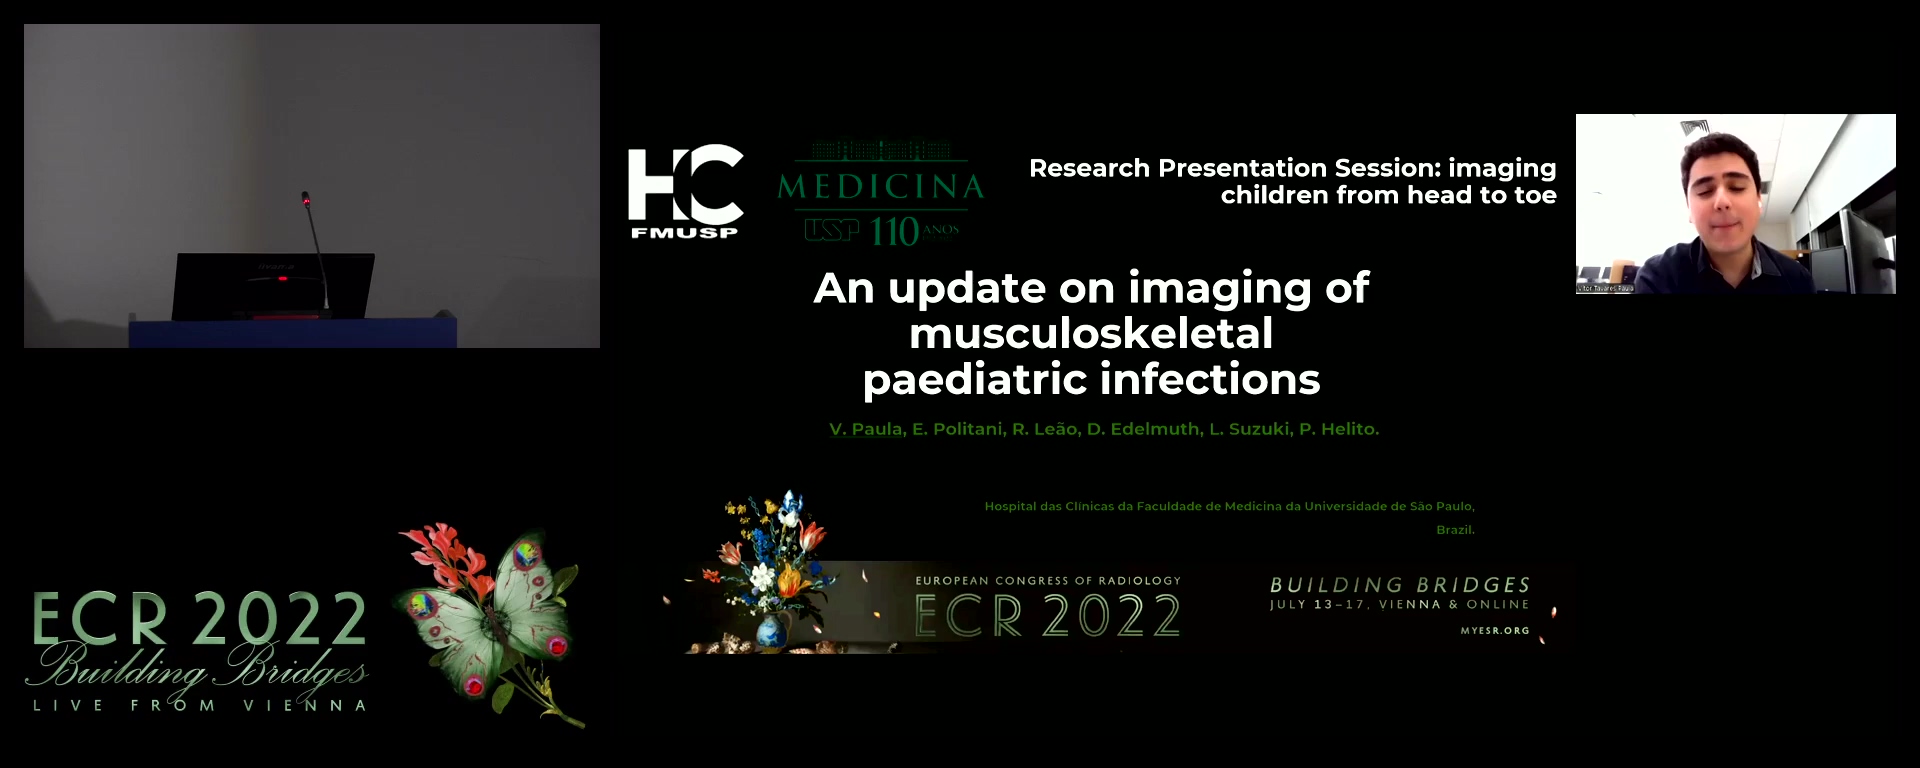 An update on imaging of musculoskeletal paediatric infections - Vitor Paula, São Paulo / BR